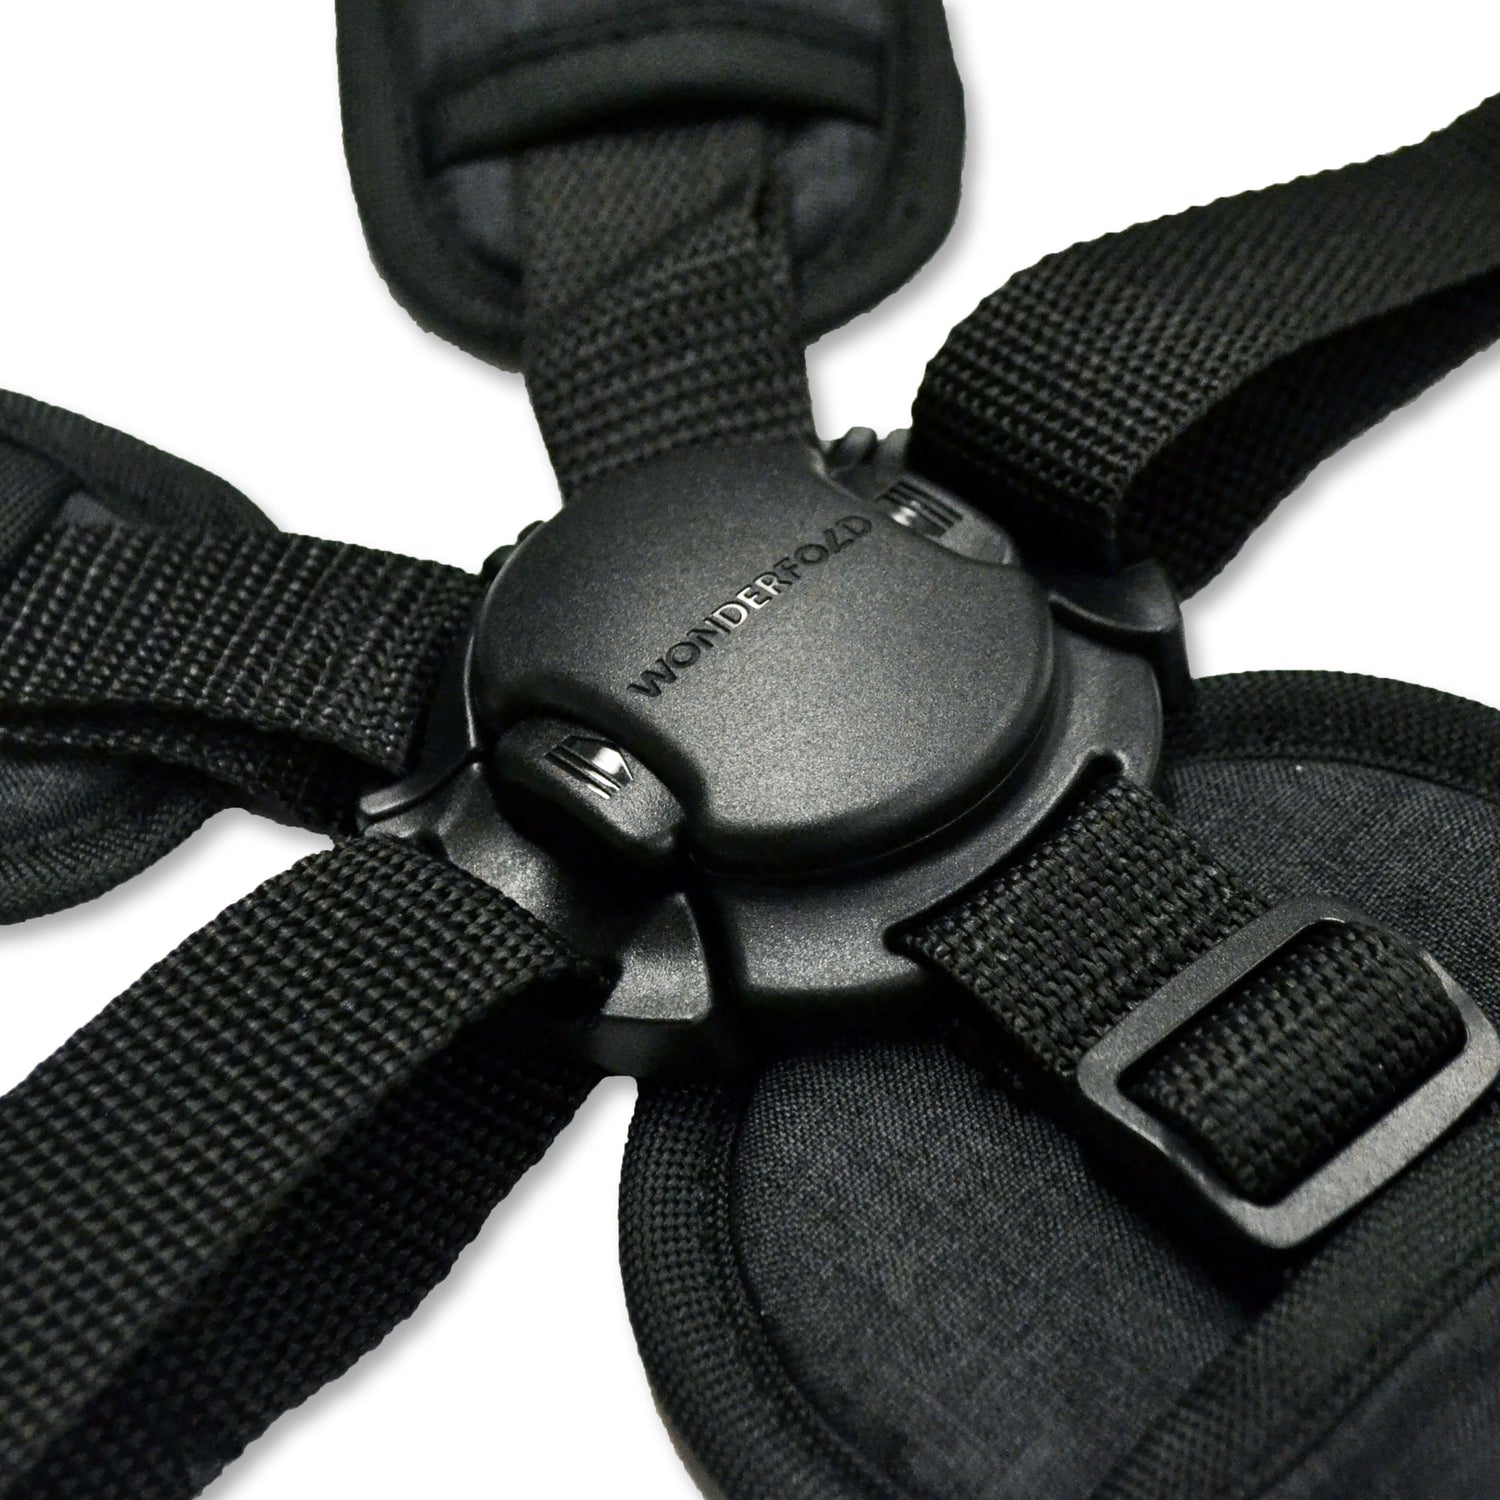 Automatic Magnetic Seatbelt Buckle with 5-Point Harness - Studio Image - Buckle Image